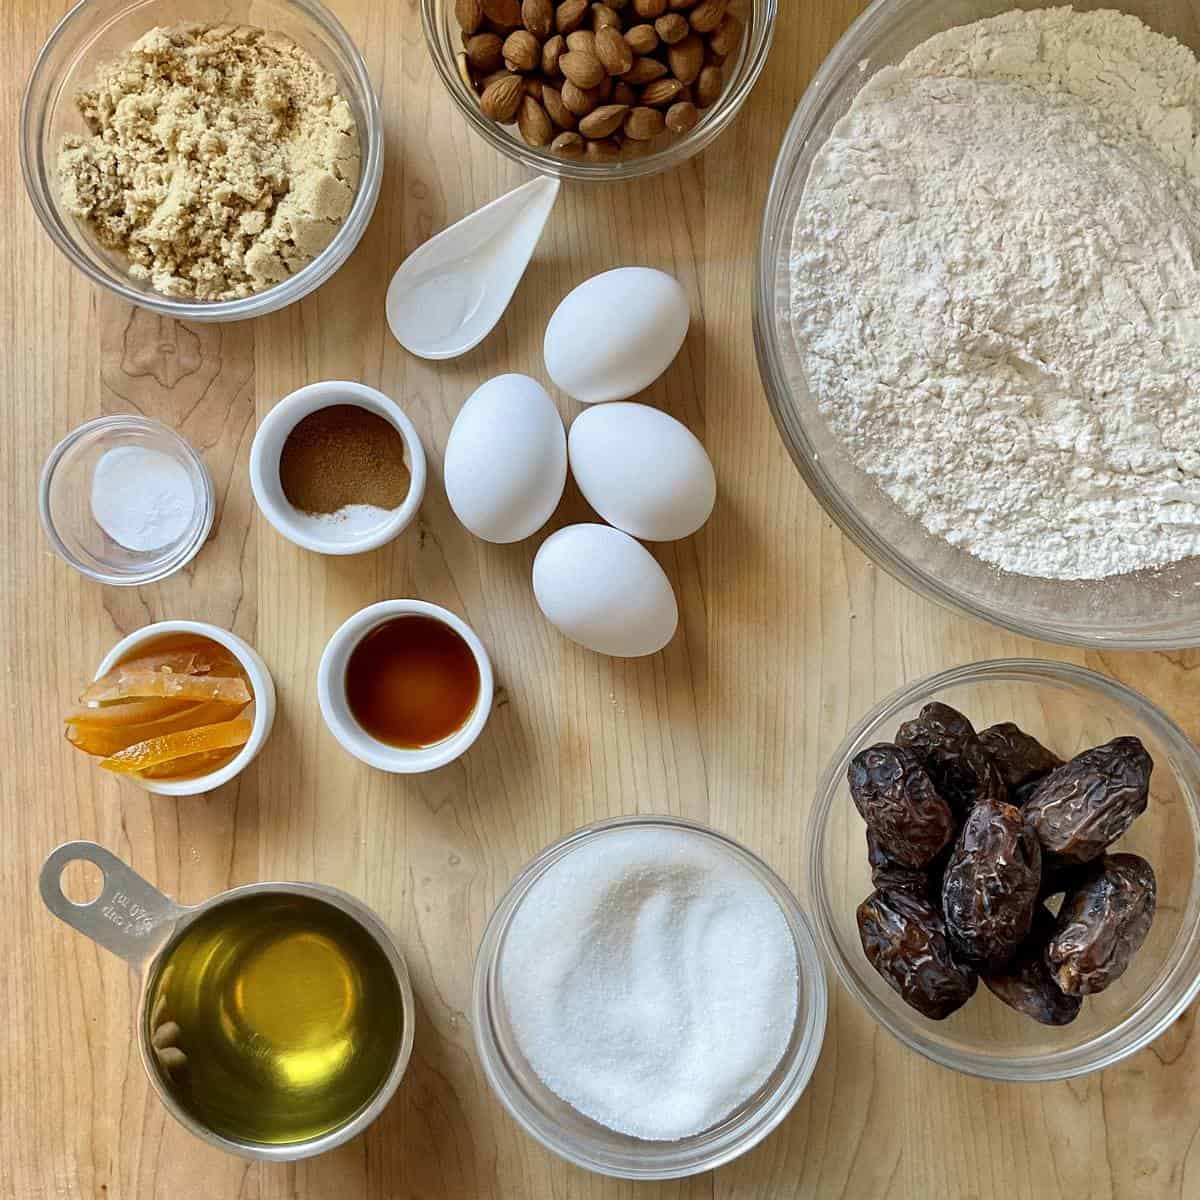 Ingredients to make date biscotti on a wooden board.